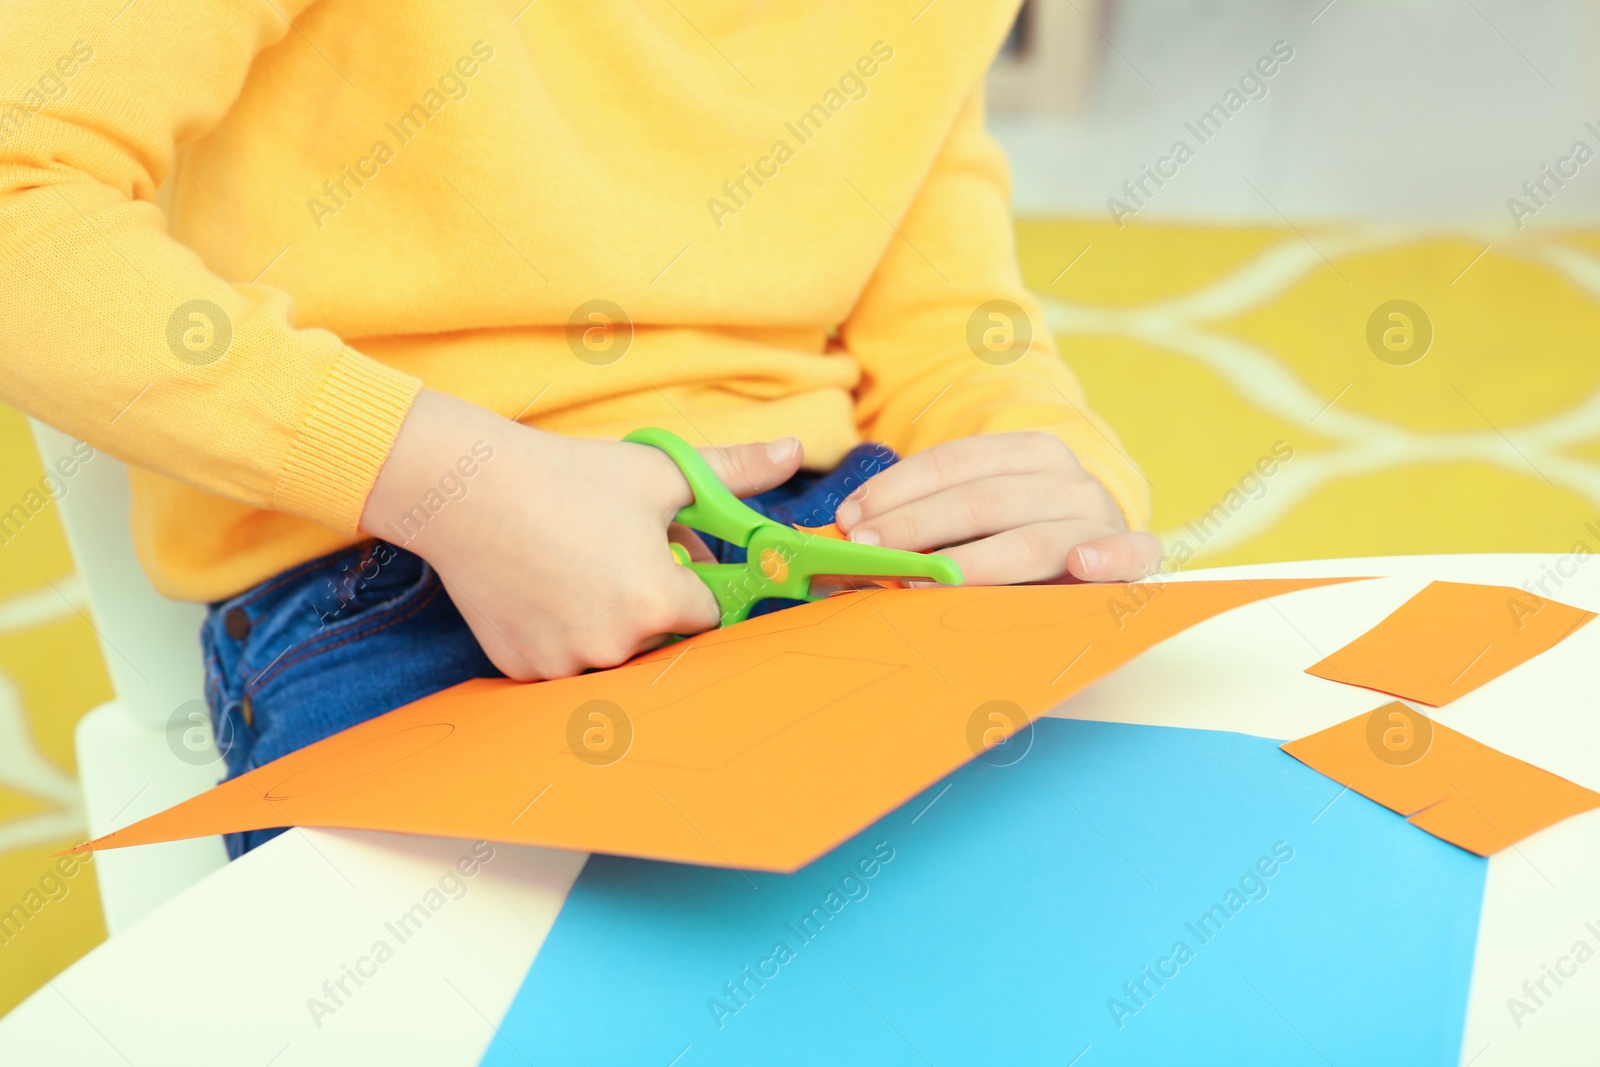 Photo of Boy cutting orange paper at desk in room, closeup. Home workplace